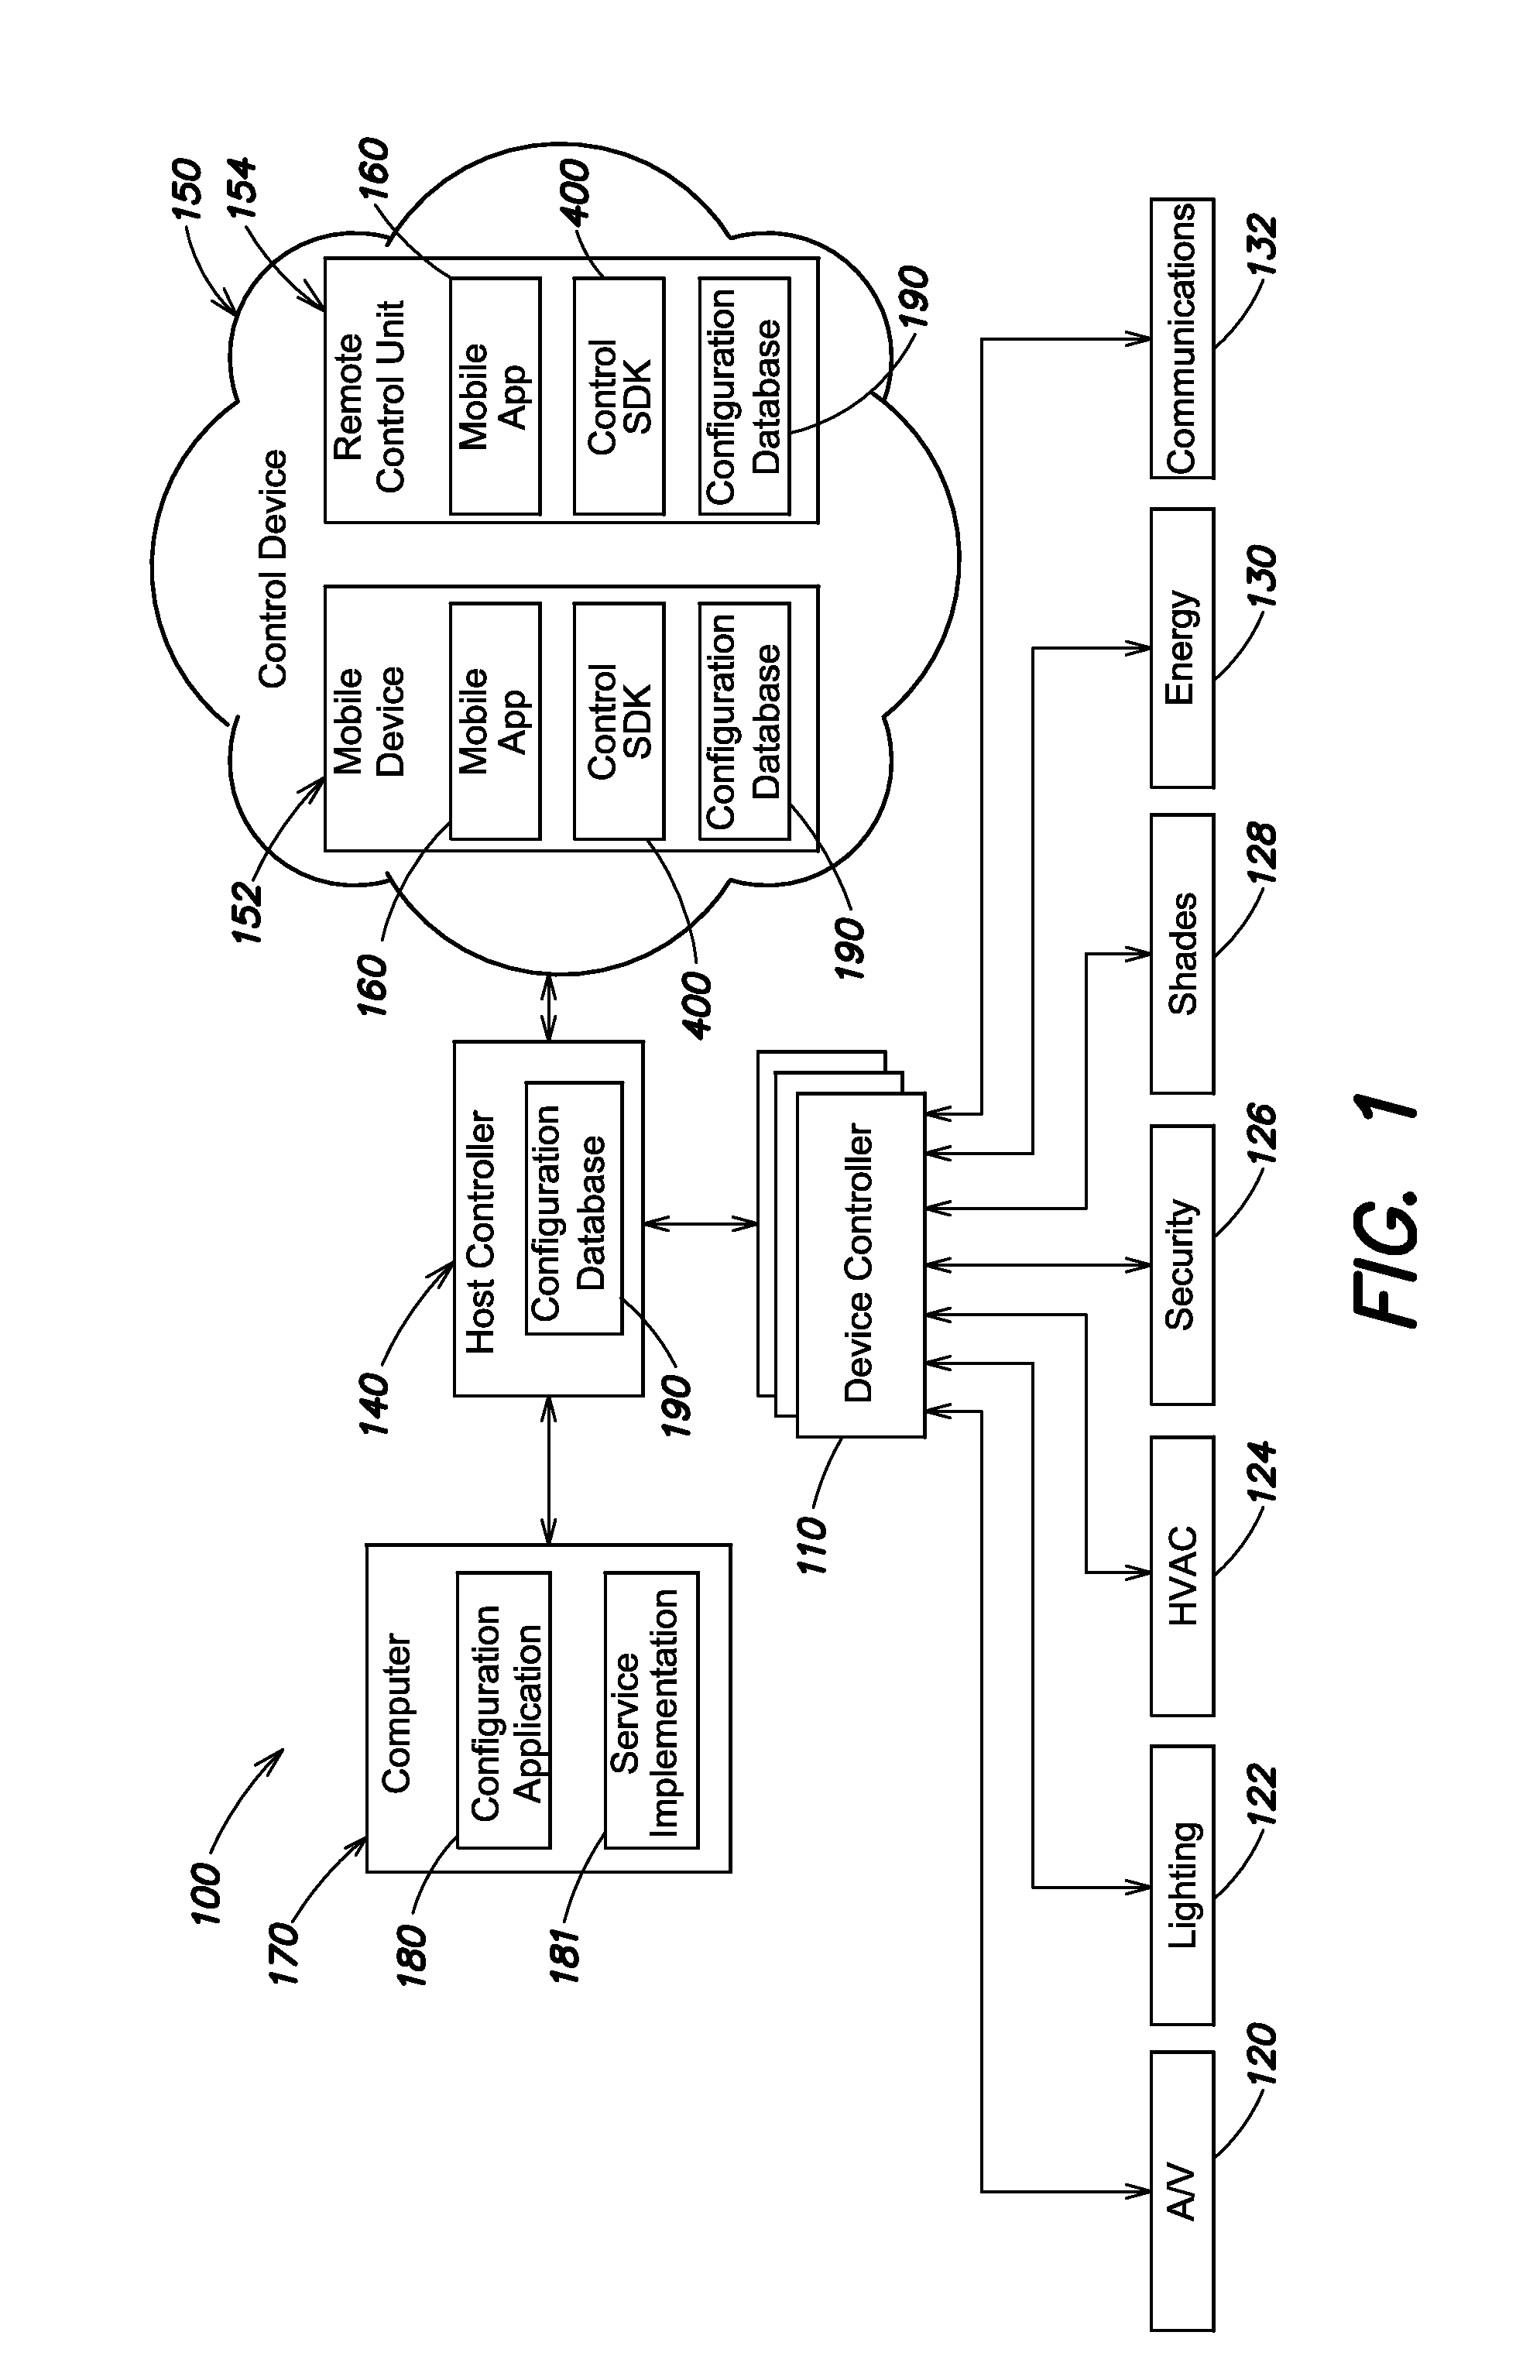 Automatic configuration of control device user interface in a home automation system